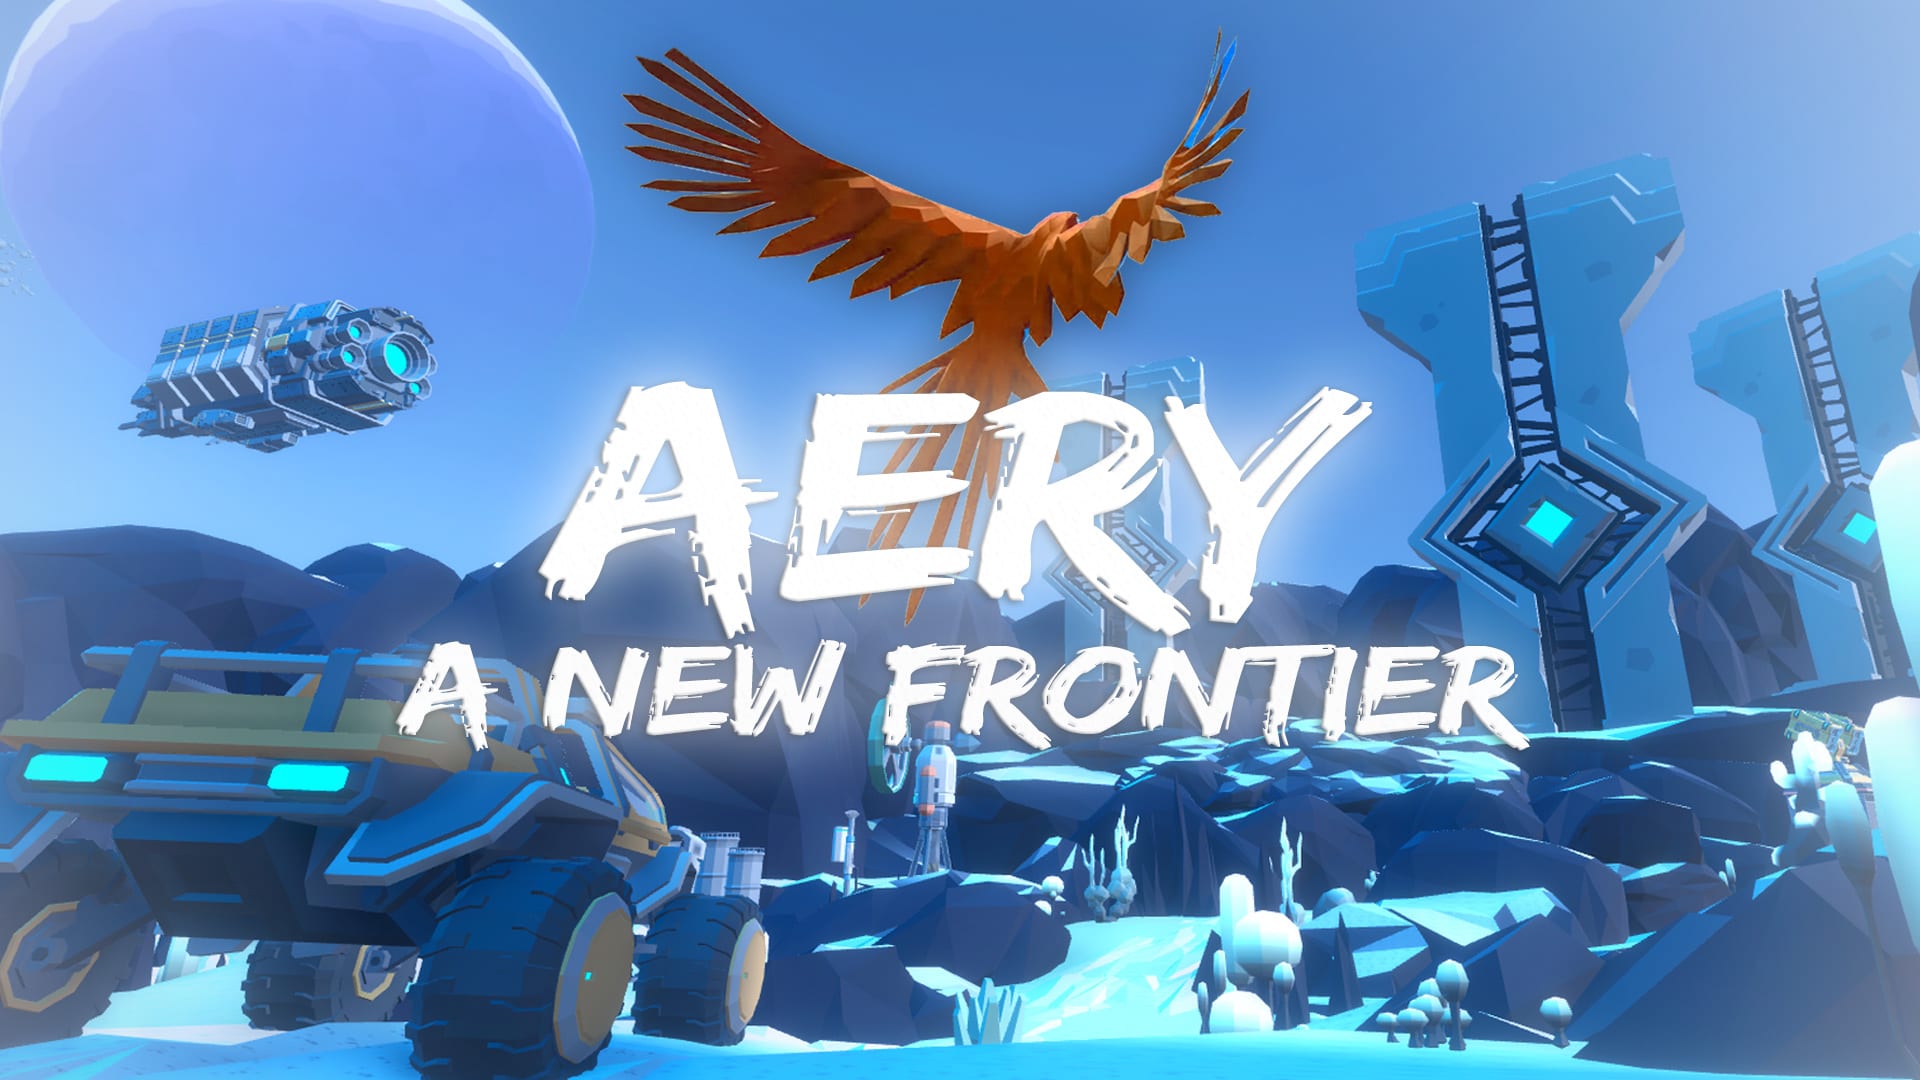 Aery – A New Frontier